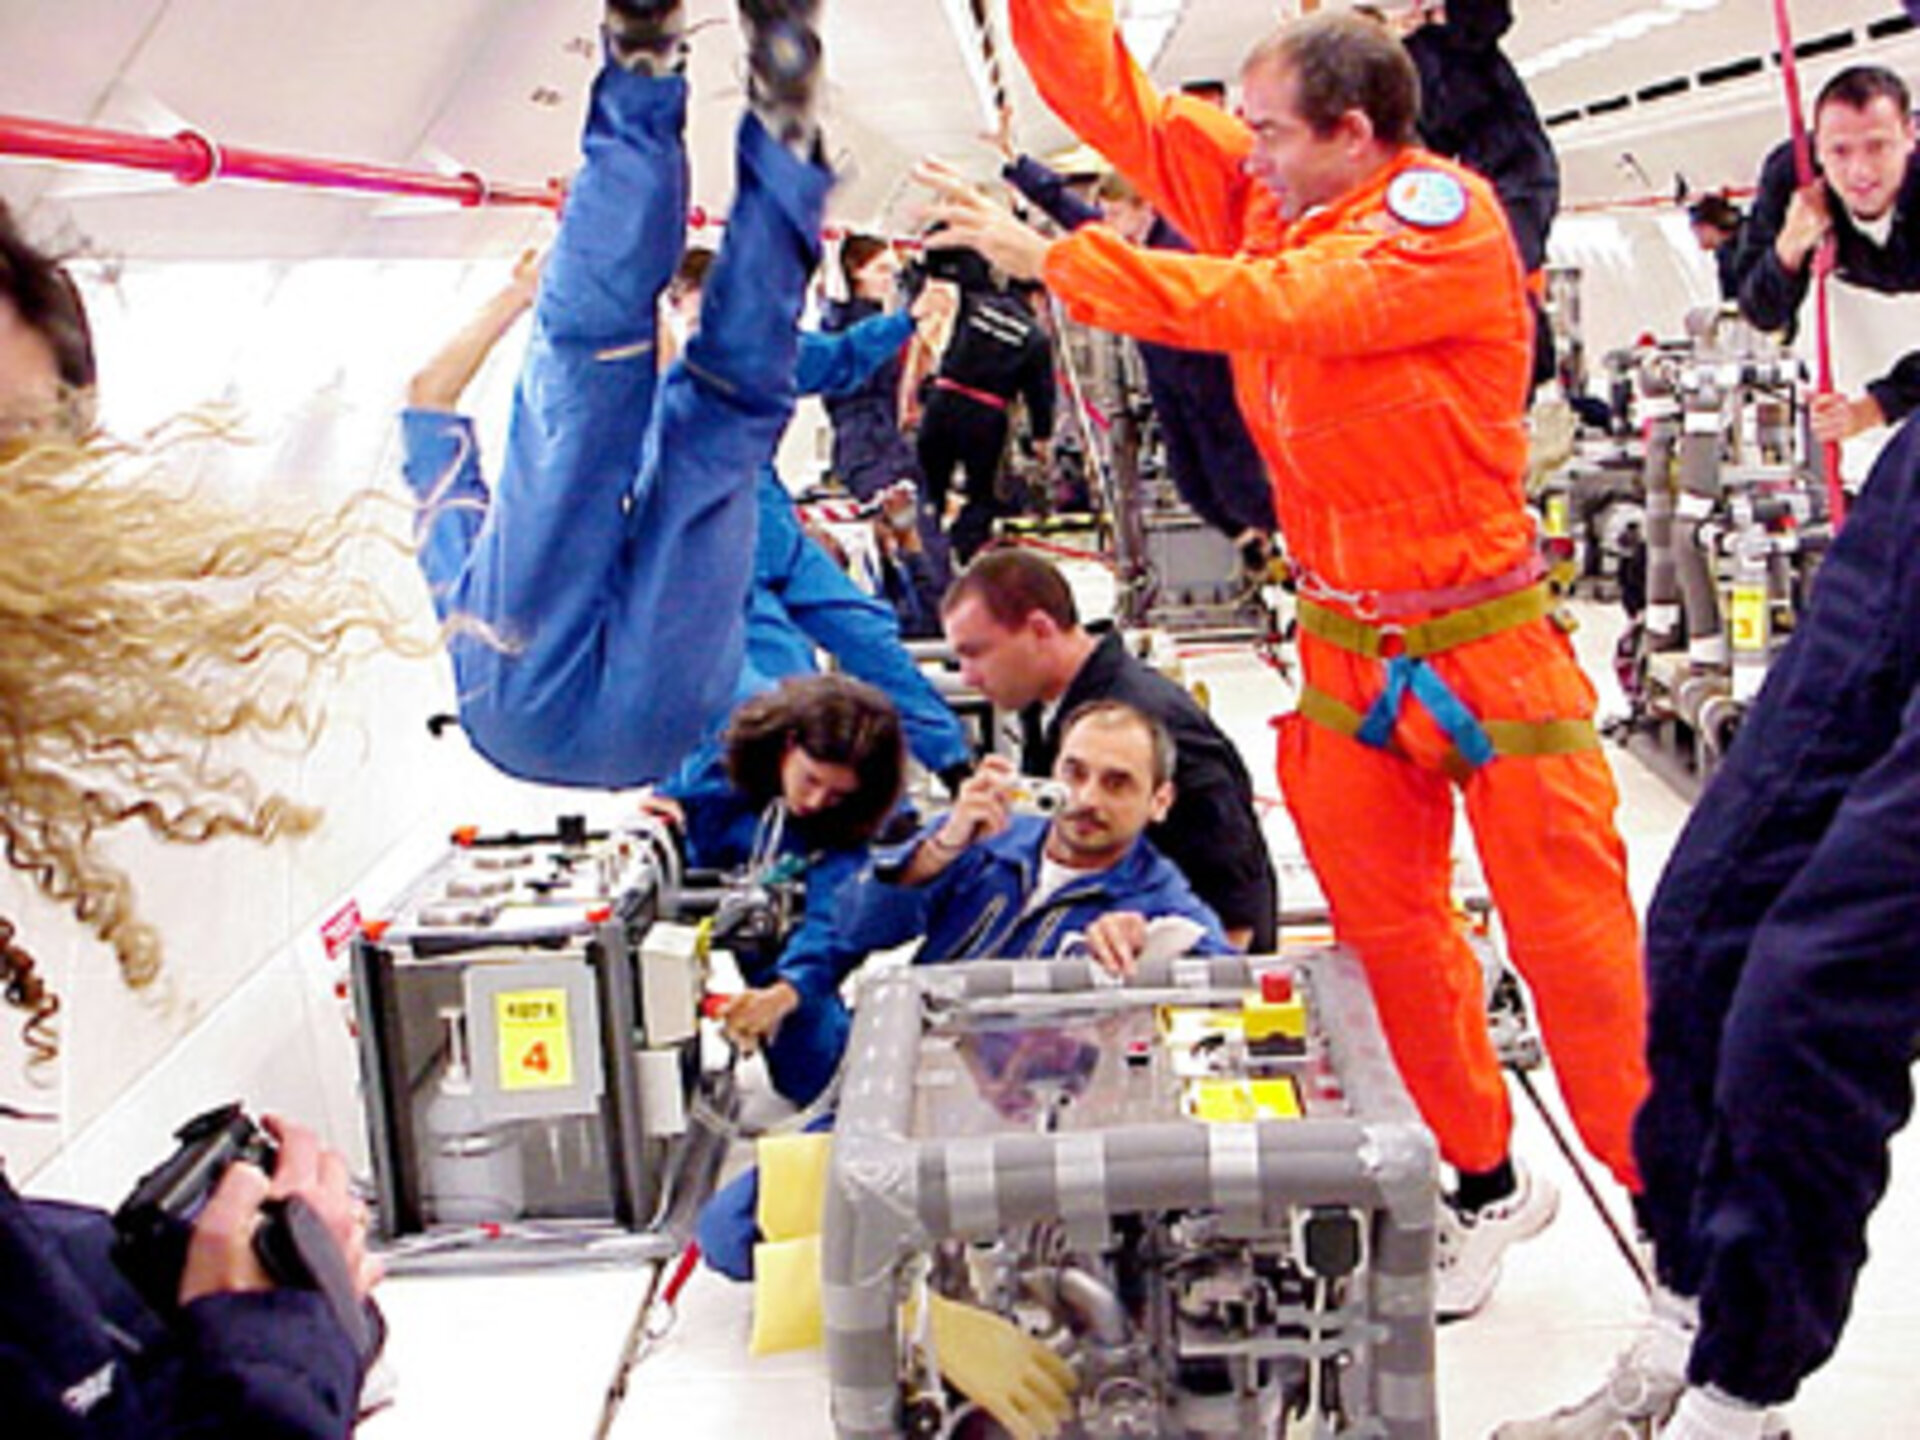 Inside the Airbus A-300 'Zero-G' during the 6th Student Parabolic Flight Campaign, 16-31 July 2003